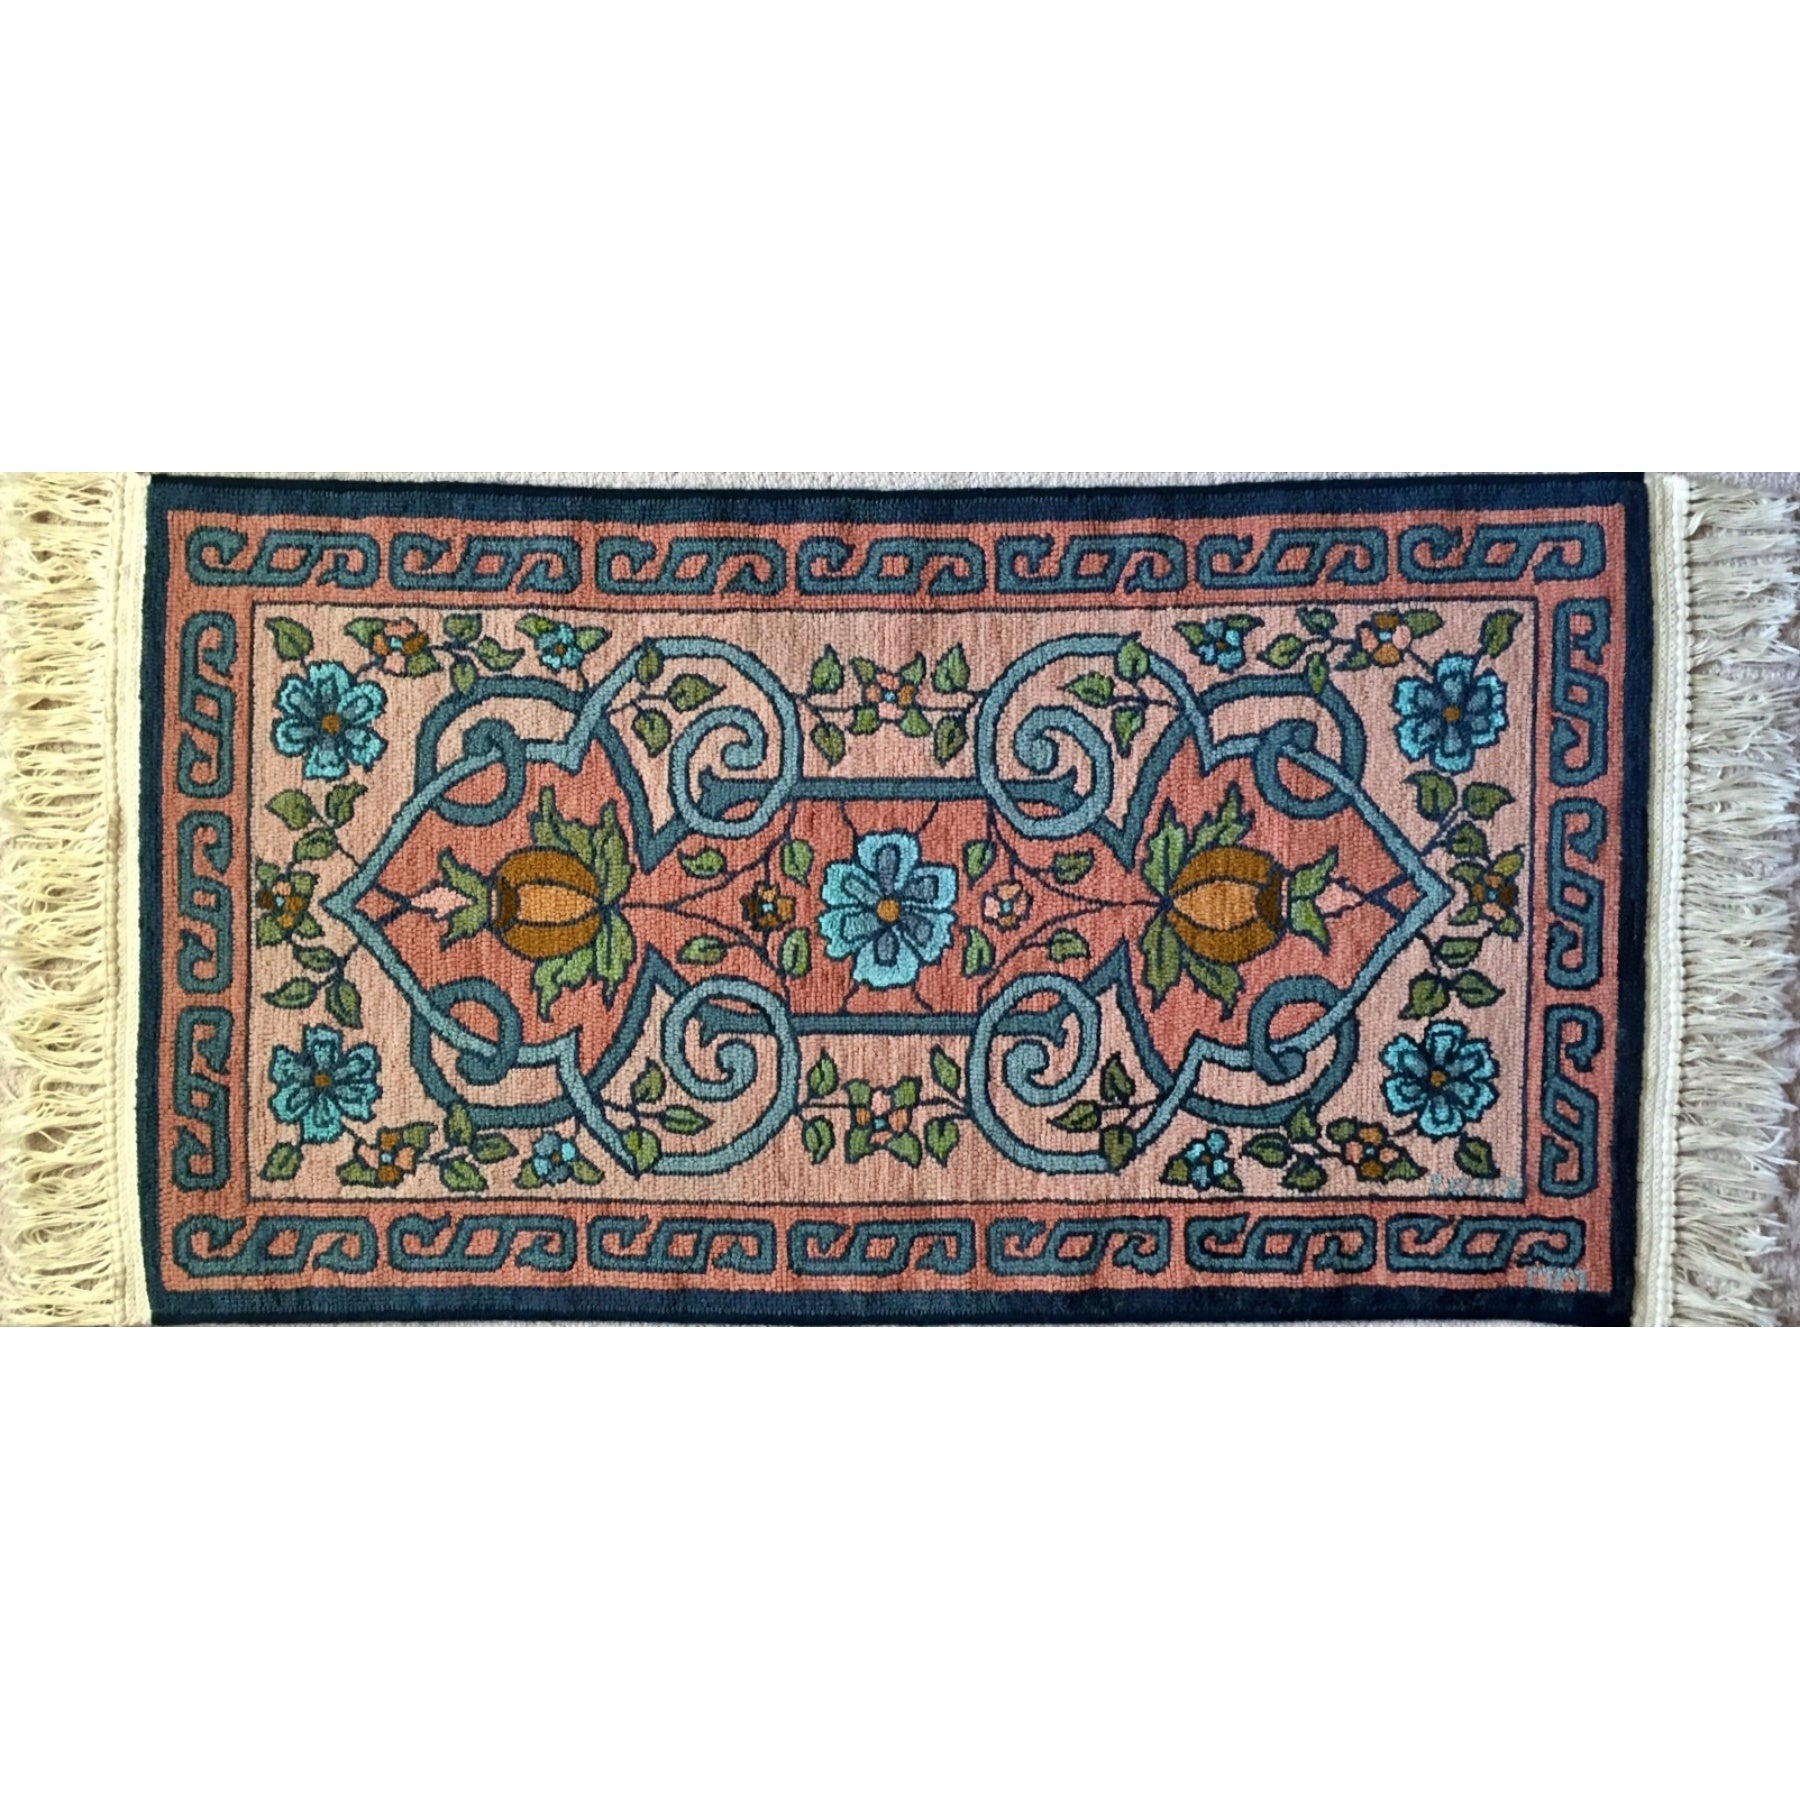 Persian Melody, rug hooked by Marg Miller